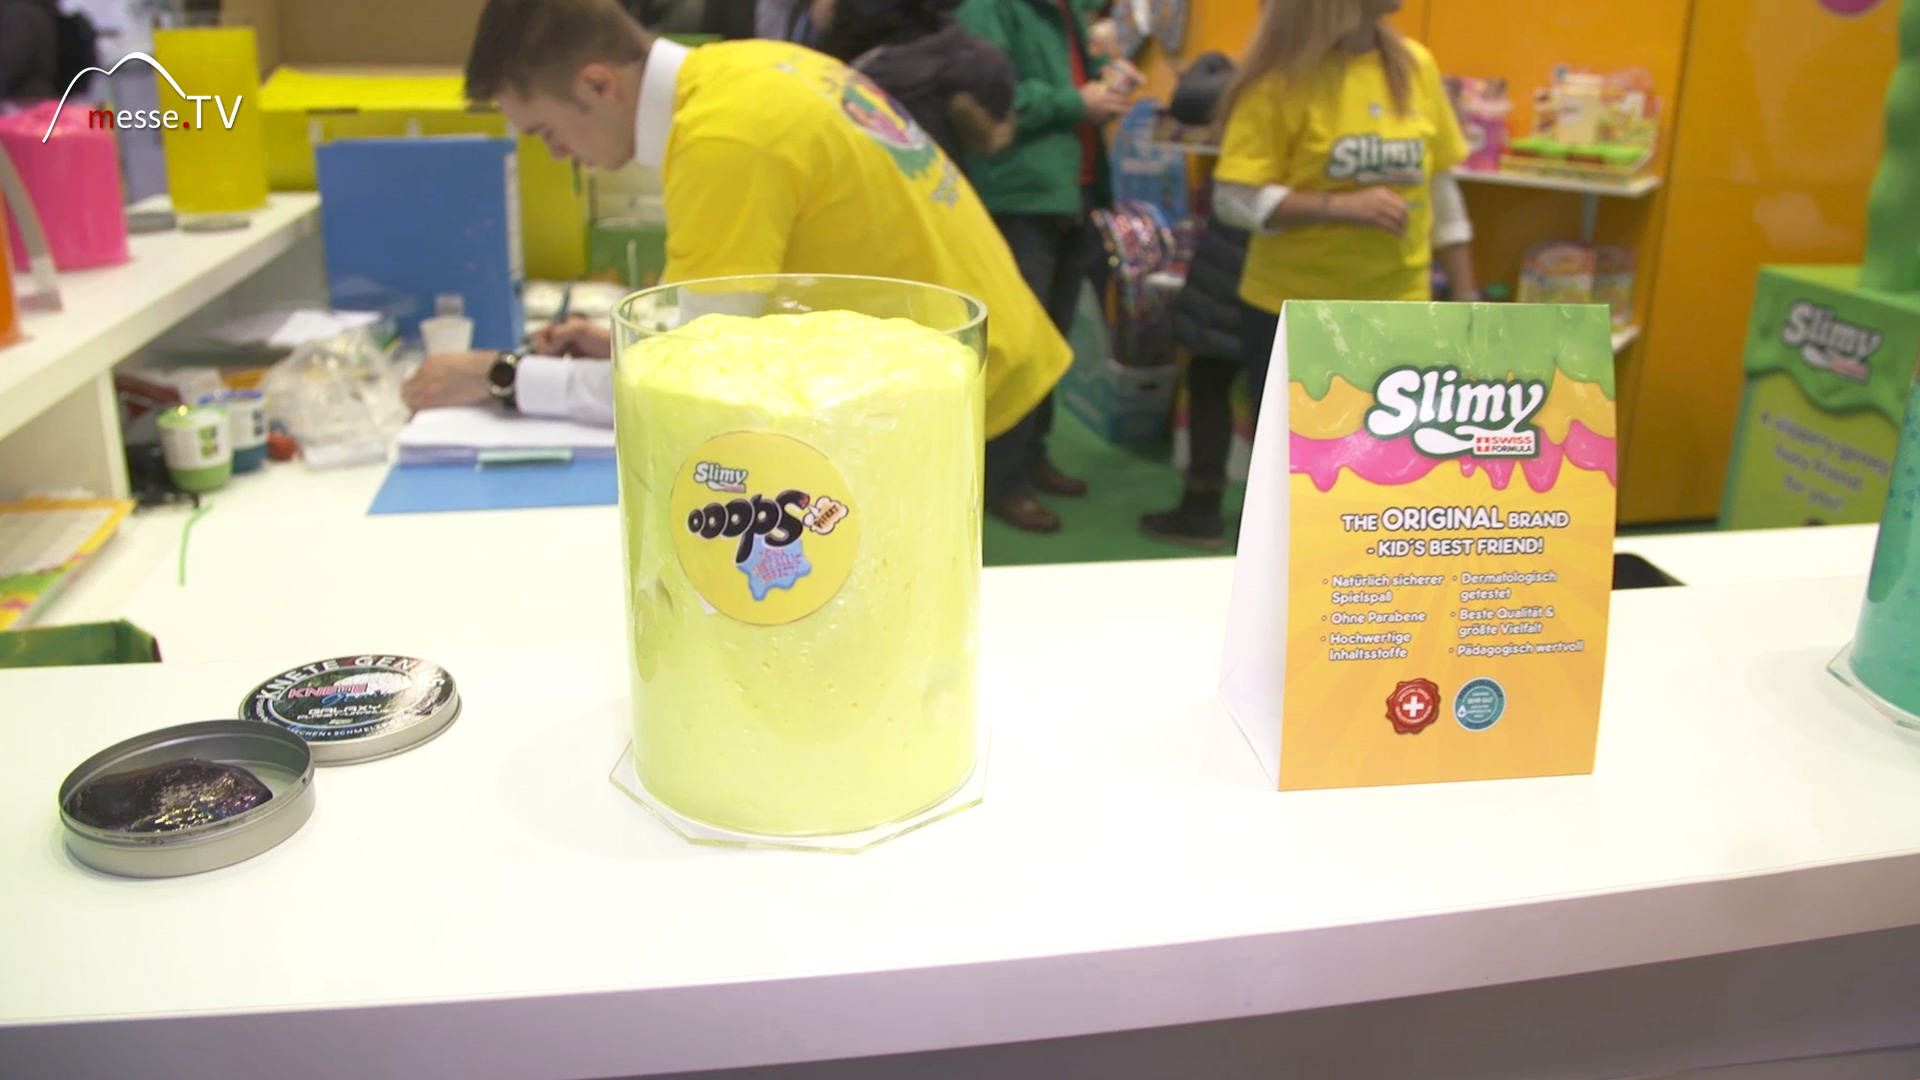 Slimy with odor fair novelty toys Spielwarenmesse 2019